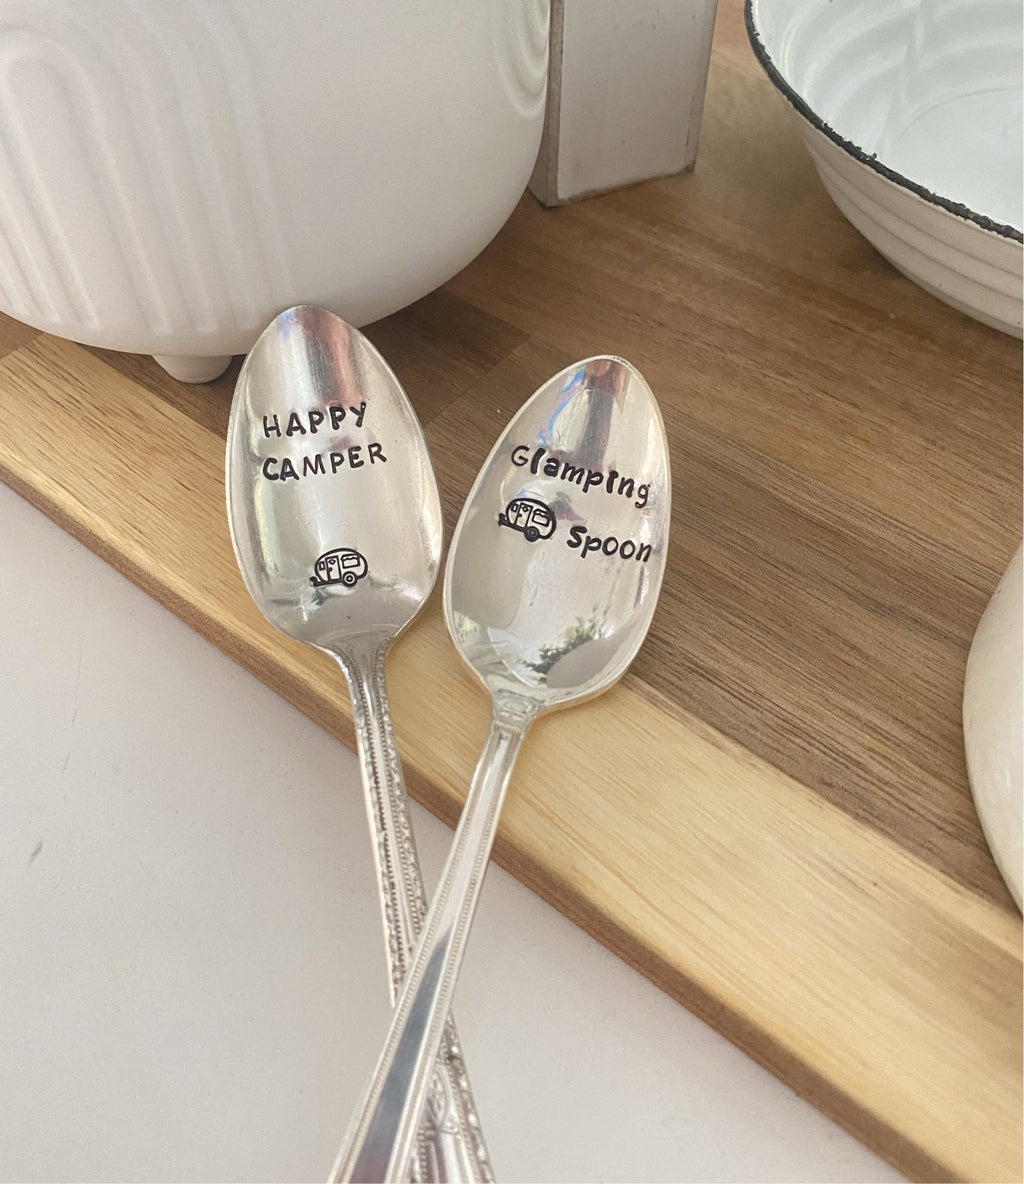 Happy Camper/ Glamping spoon